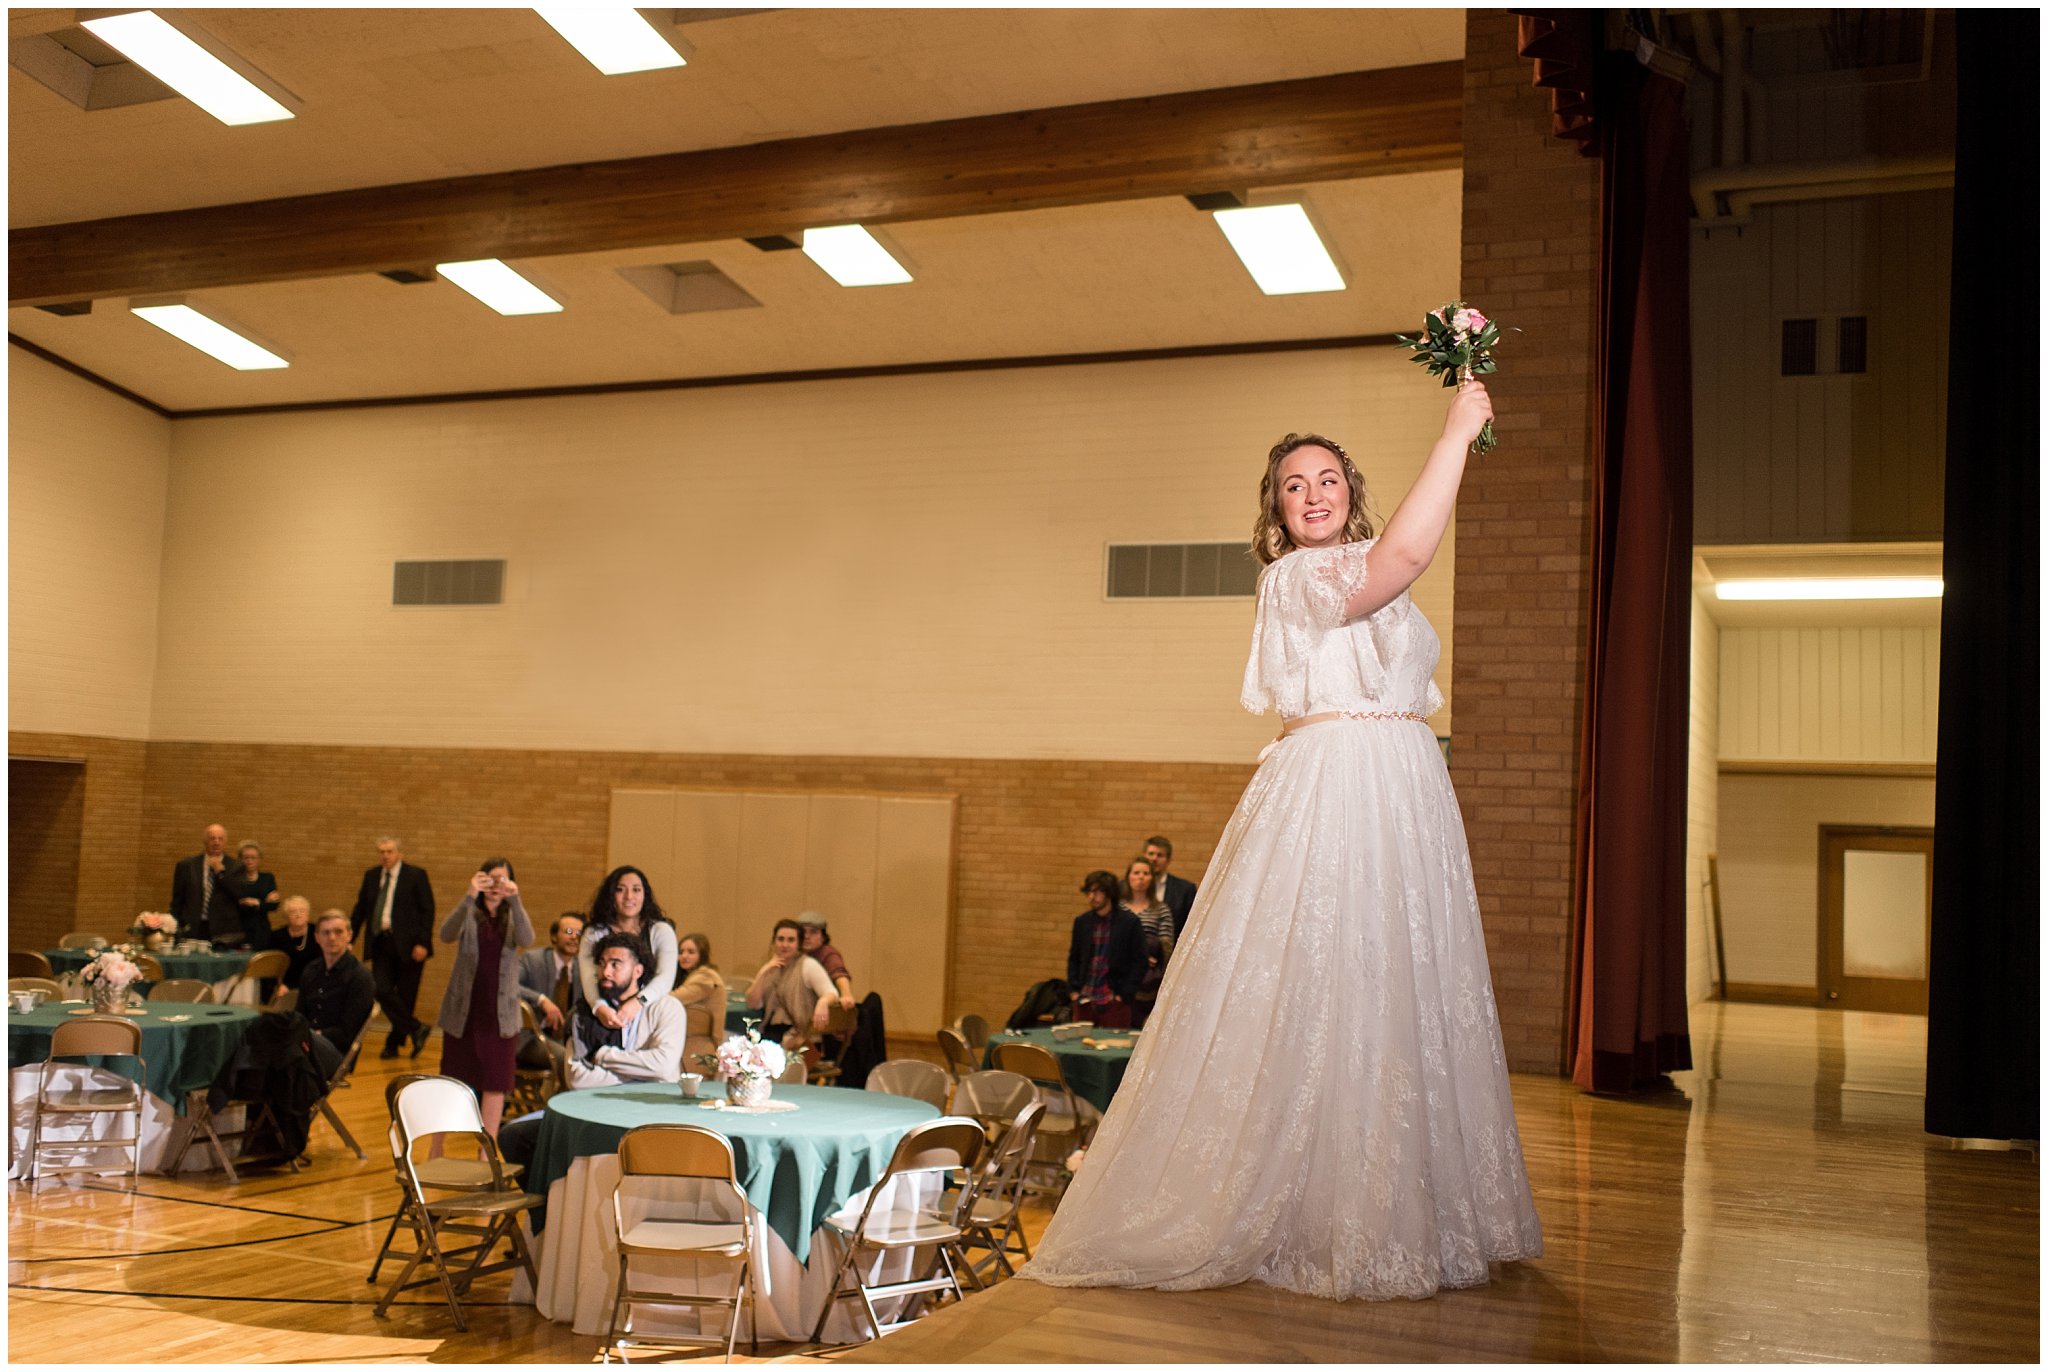 Bride tossing bouquet off stage | Ogden Temple Winter Wedding | Emerald Green and Pink Wedding | Jessie and Dallin Photography